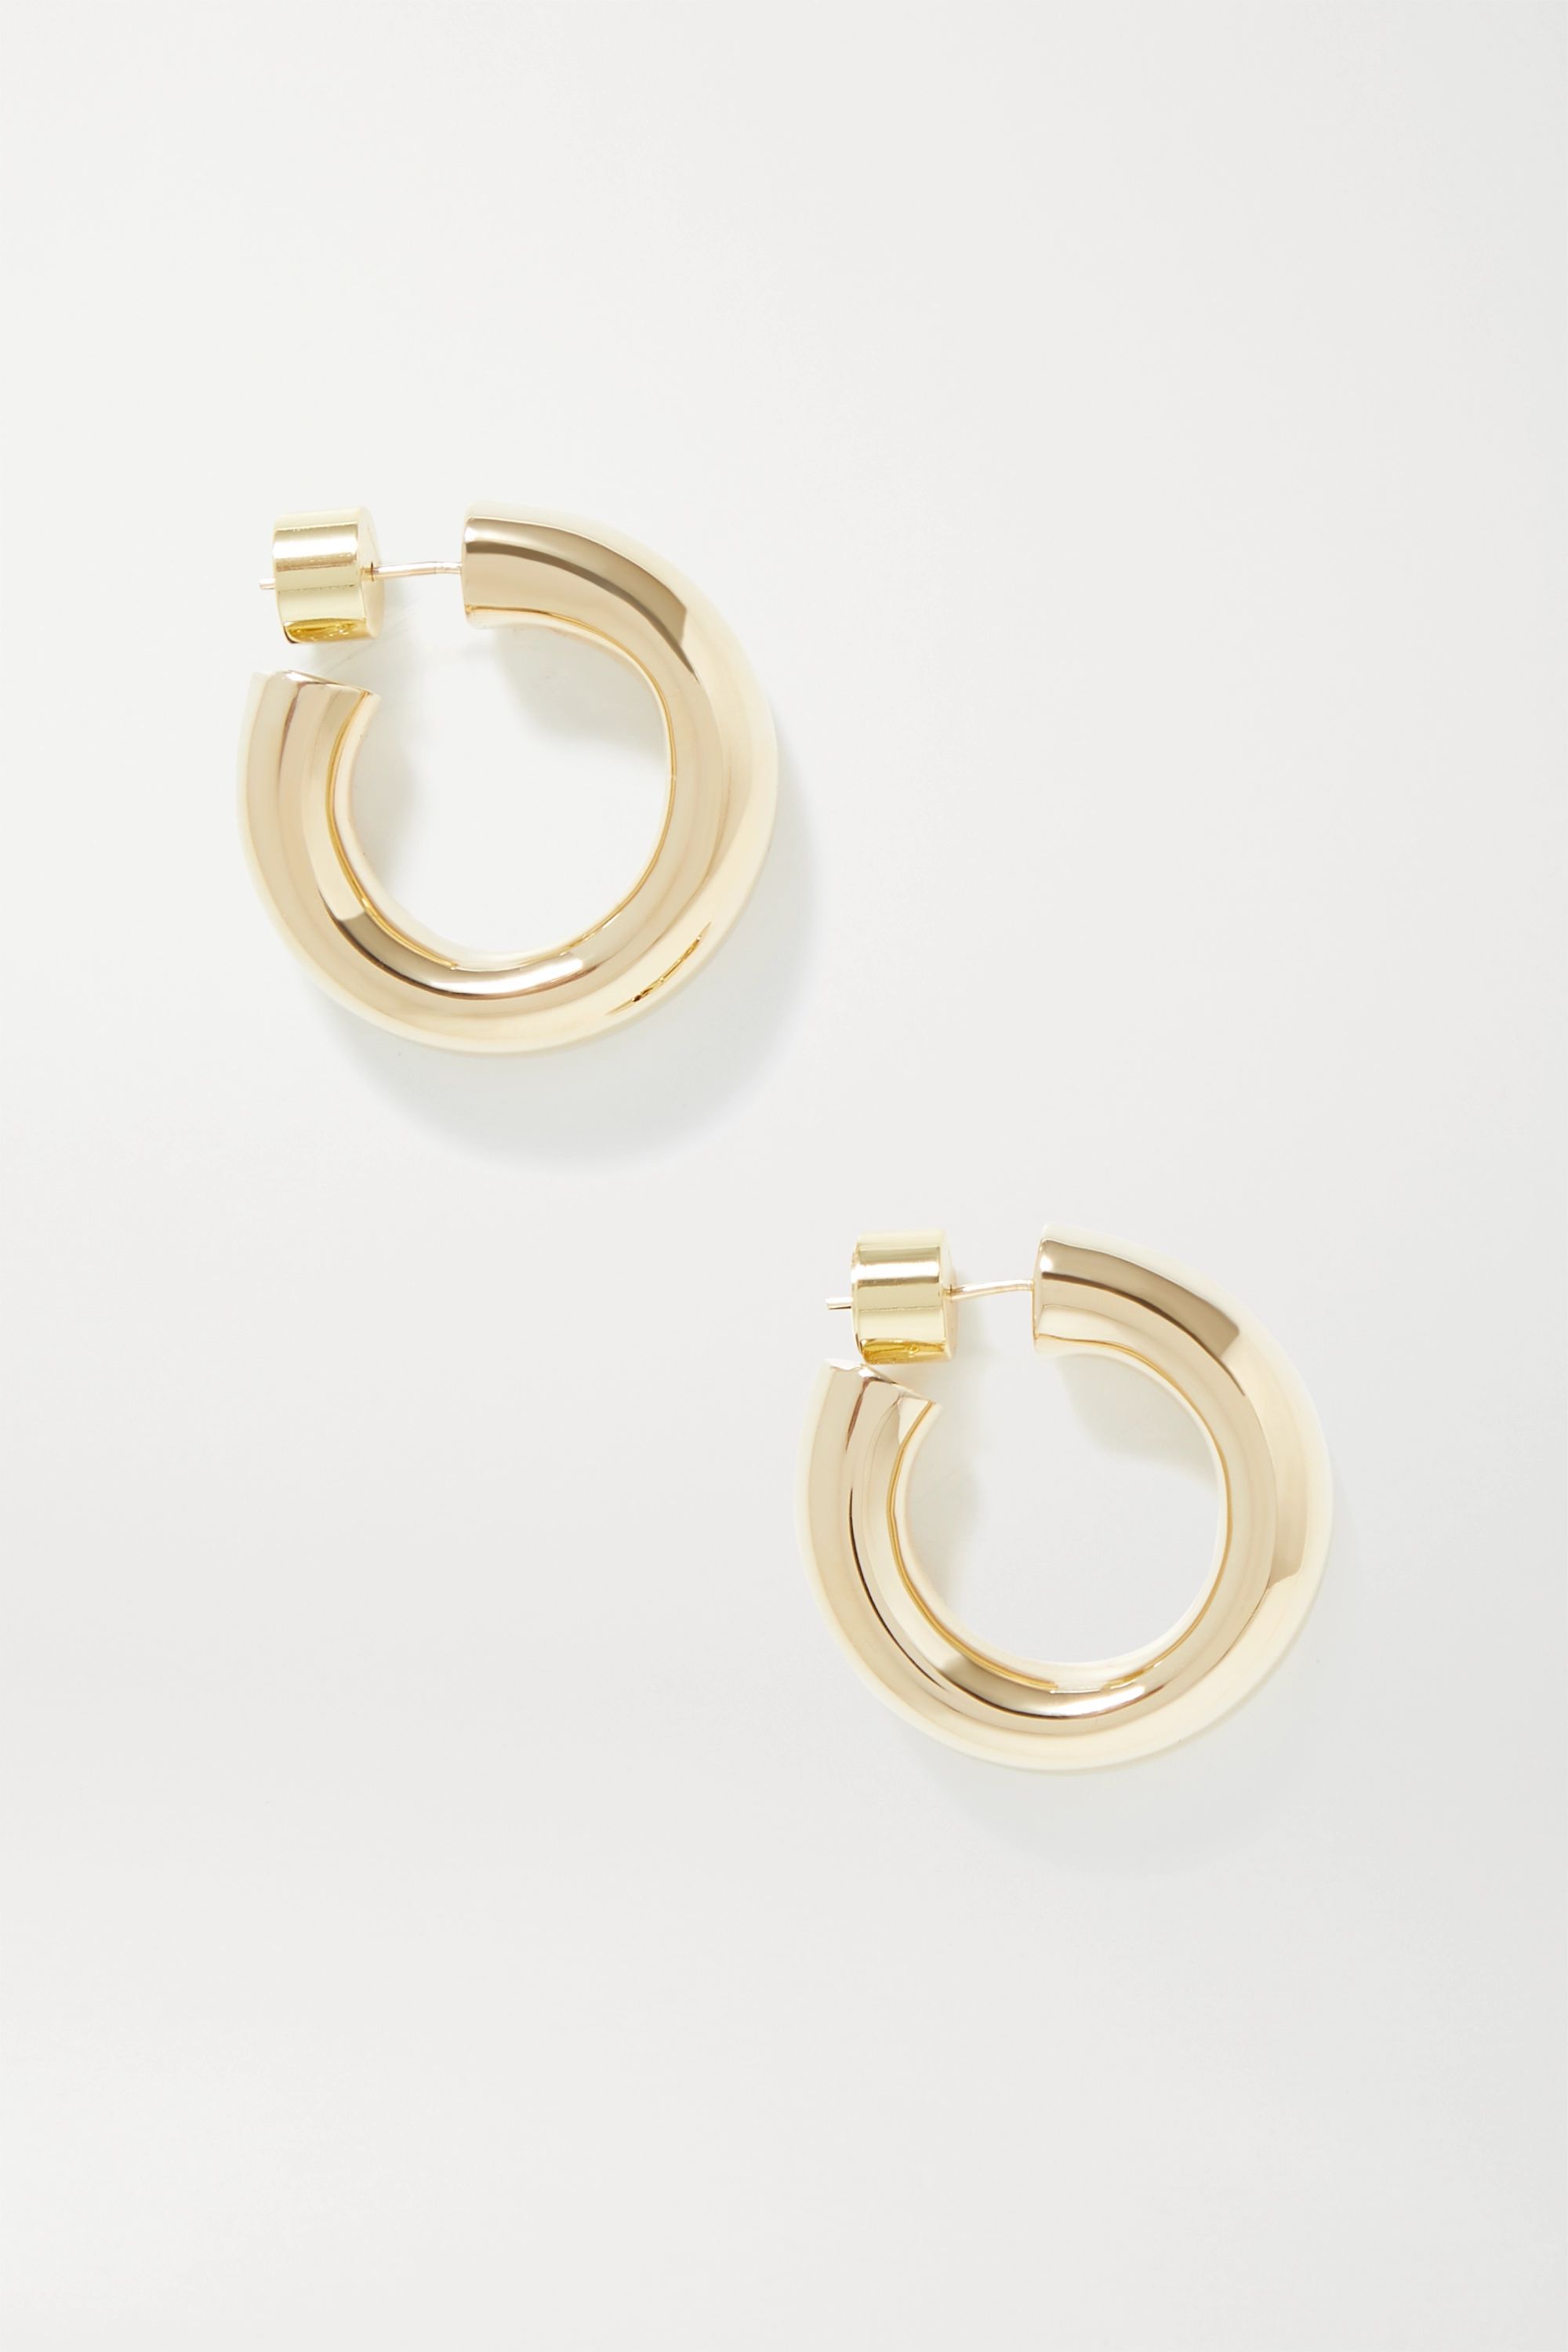 15 Best Jewelry Gifts for Holiday 2021 - Stylish Earrings, Watches ...